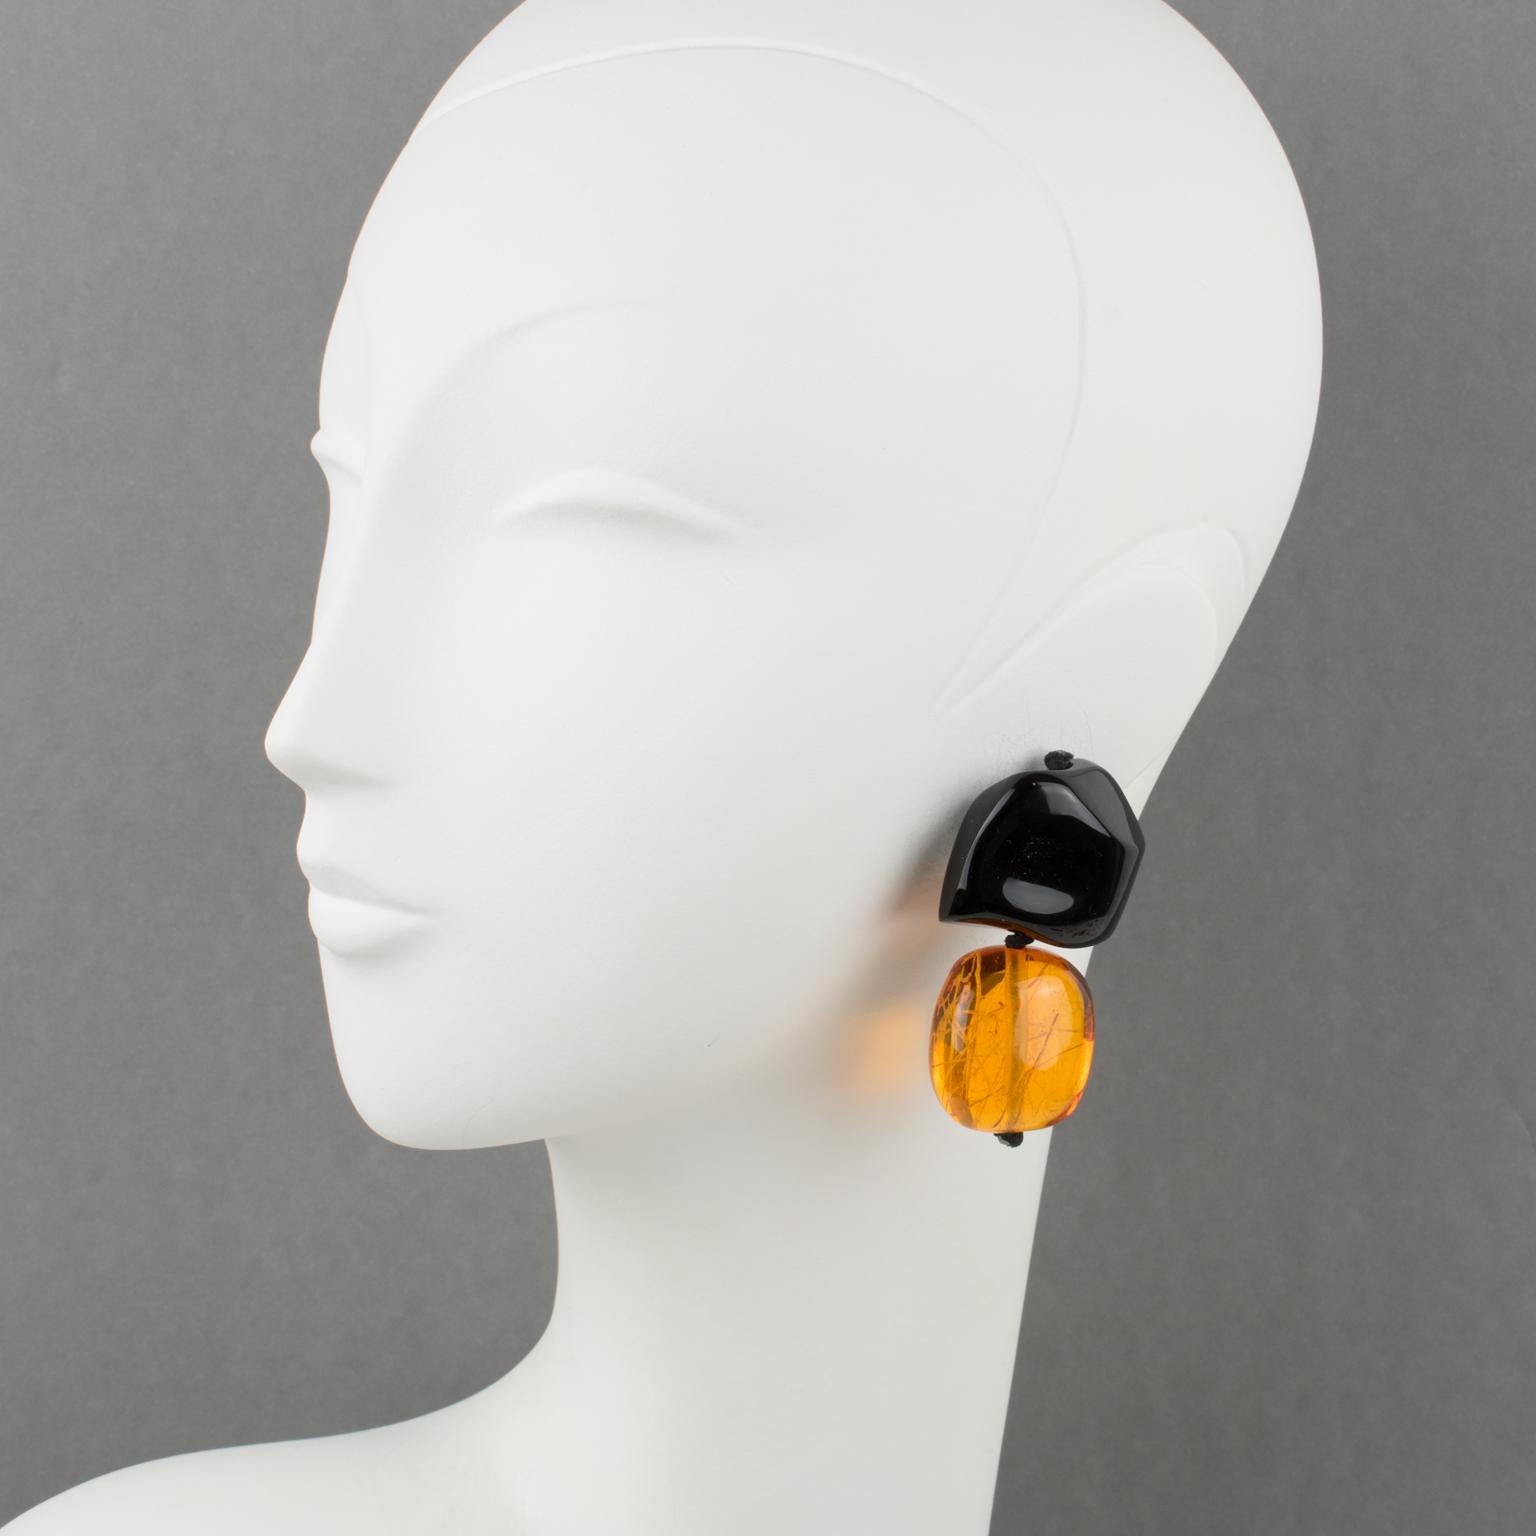 Stunning oversized clip-on earrings by Gerda Lyngaard for Monies. Hand-made dangling pebbles carved shape in Lucite or resin with inclusions. Assorted color of shiny black and burnt orange-amber with threads inclusions. Marked 